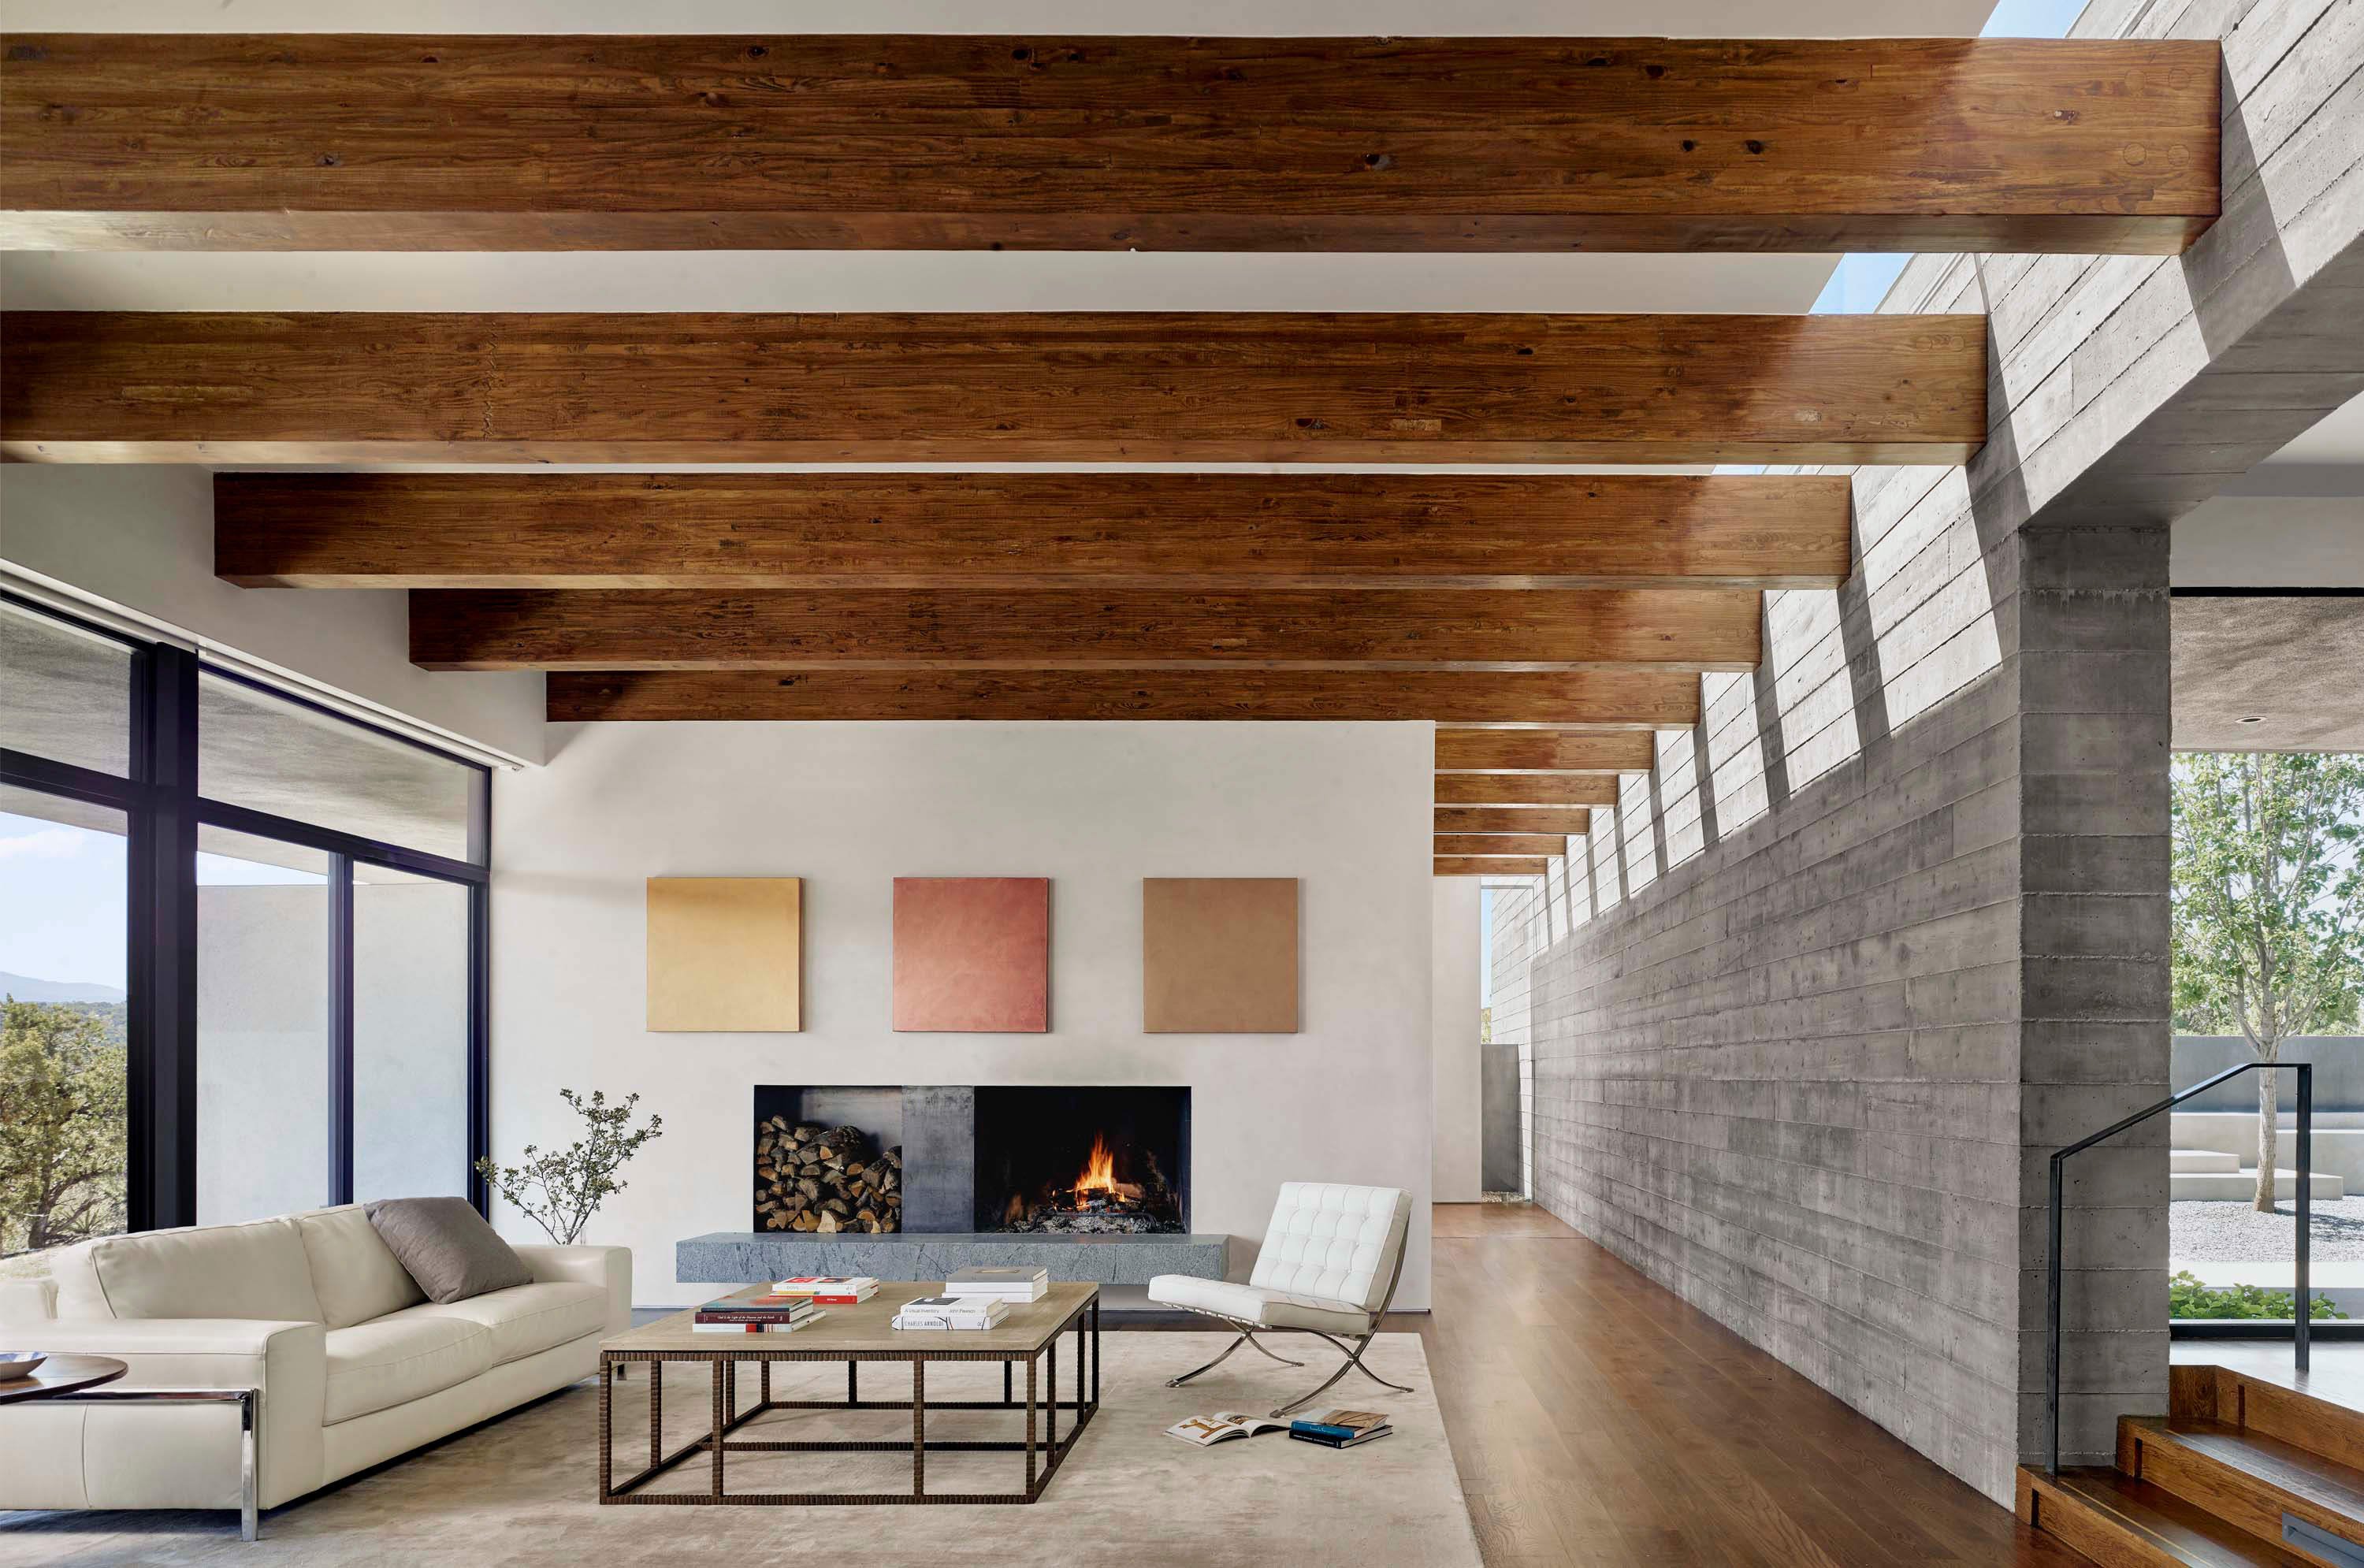 Interior photo of the Sangre de Cristo House by Specht Novak Architects. Shot by Casey Dunn, featuring a bright living area with beamed ceilings, Fireplace, and stairs from entrance area.